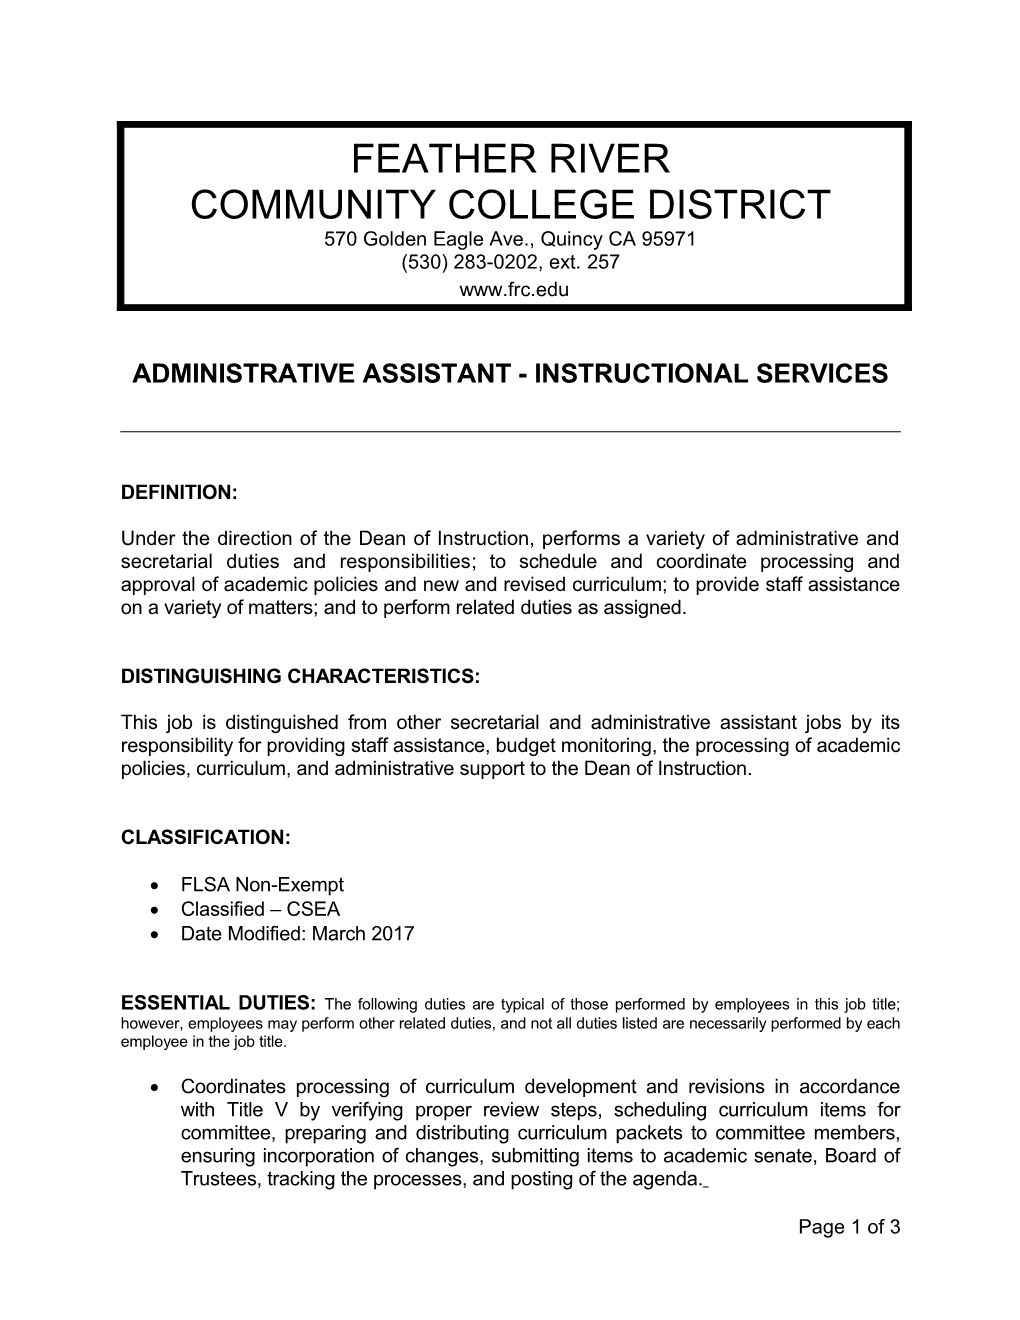 Administrative Assistant - Instructional Services